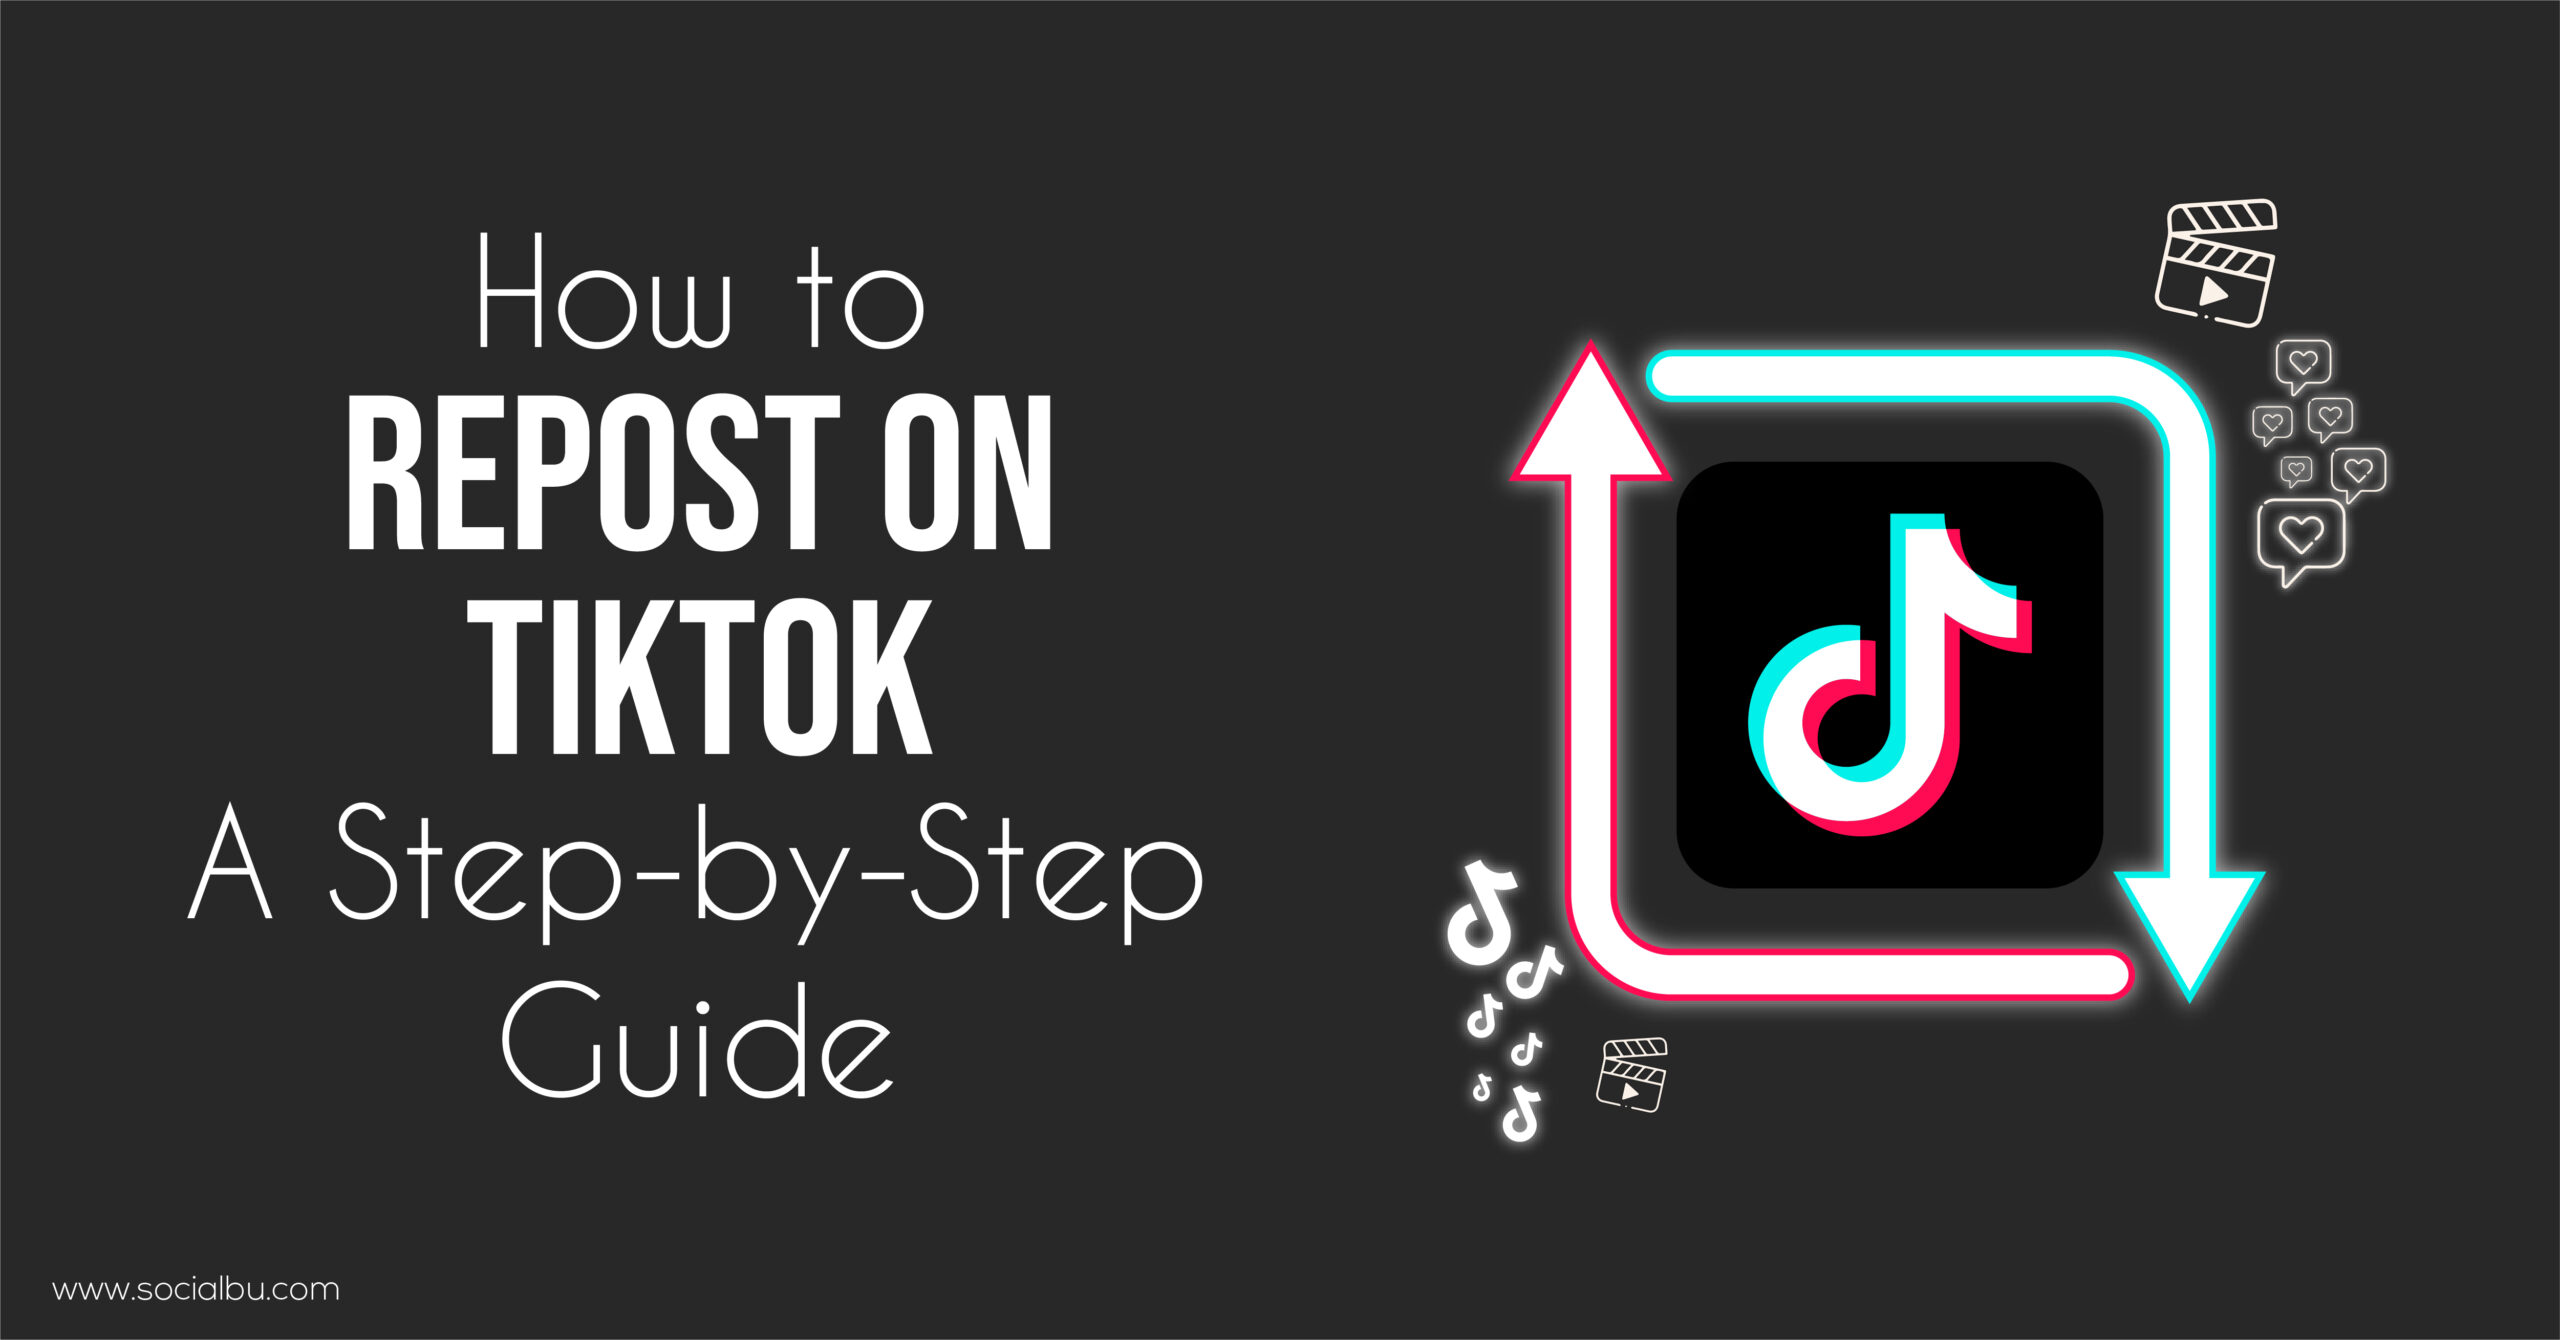 How to Repost on TikTok: A Step-by-Step Guide